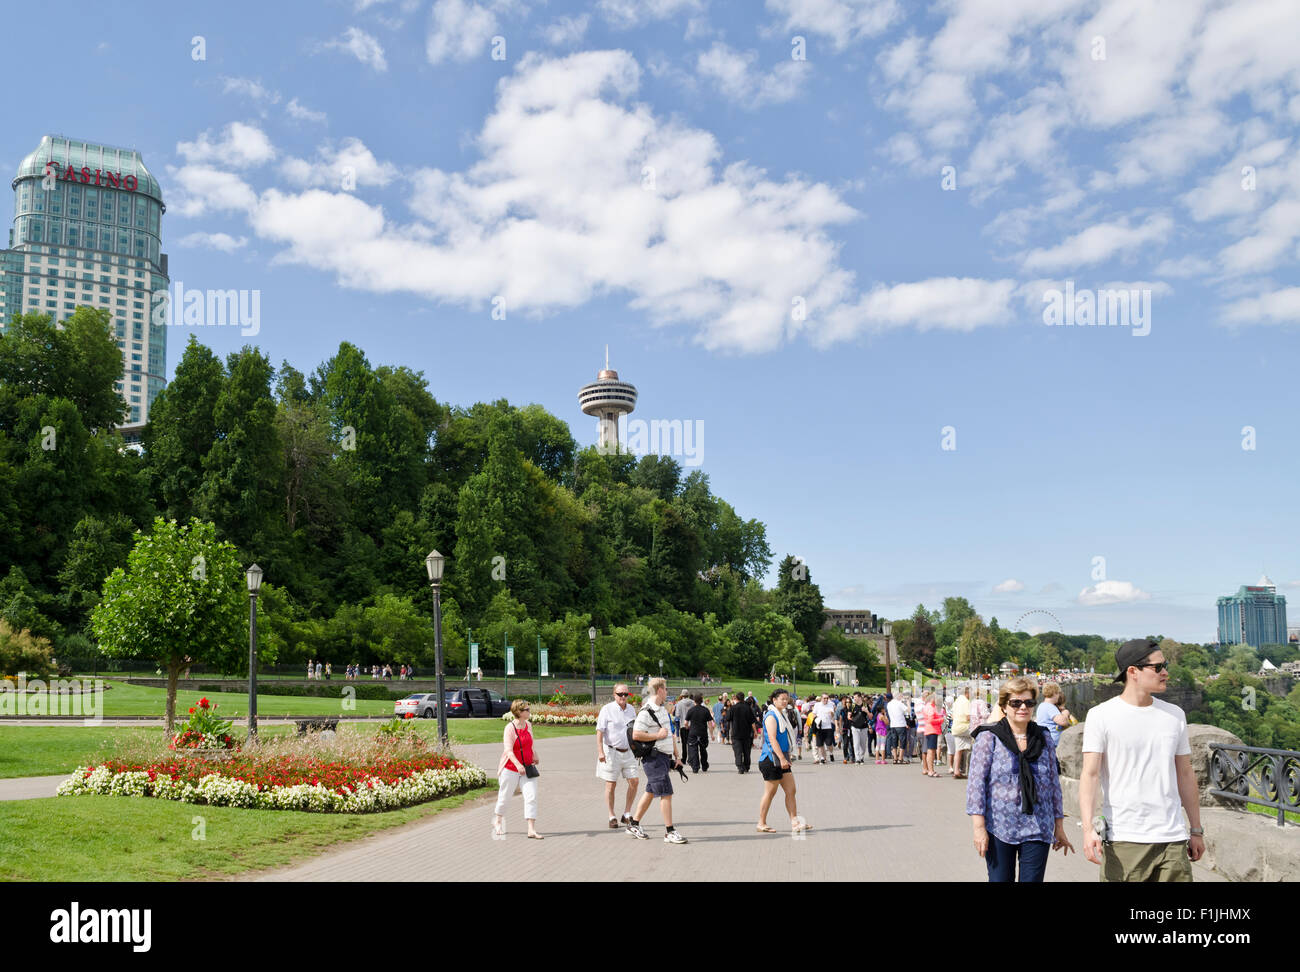 Tourists walking along the promenade by Niagara Falls on the Canadian side.  Fallsview Casino and Skylon tower in the distance. Stock Photo